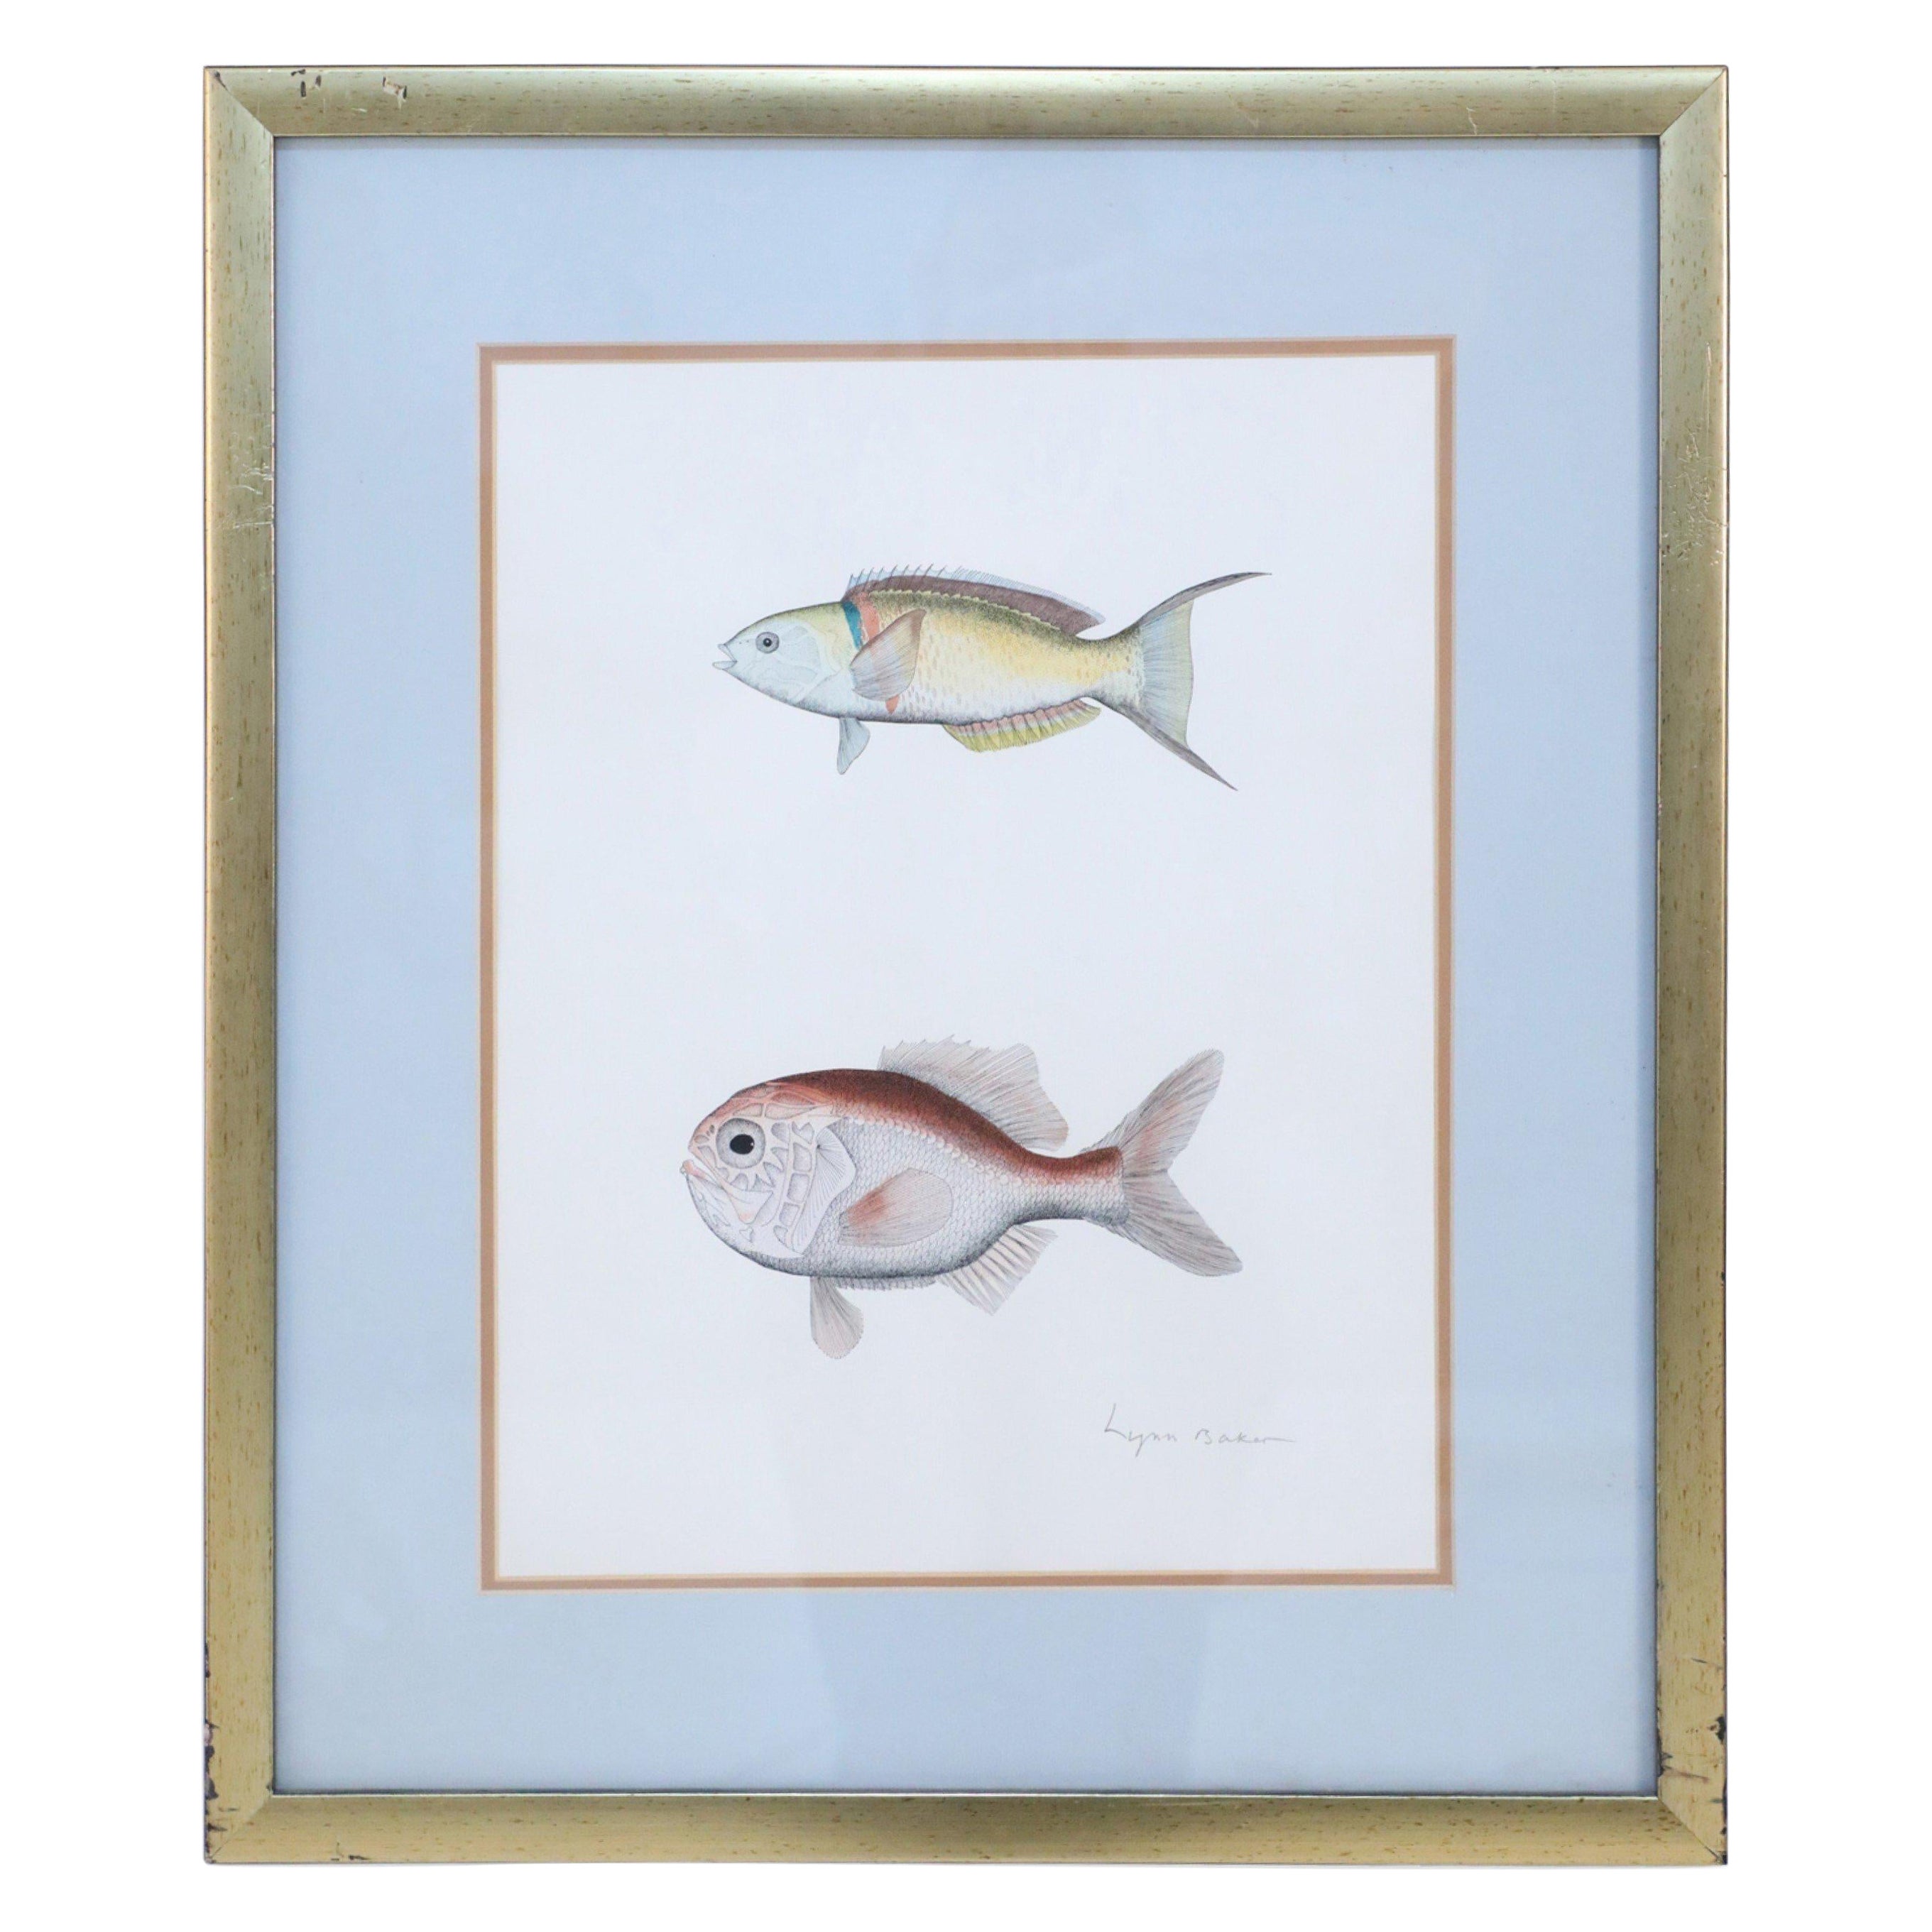 Framed Lithograph of Two Tropical Fish